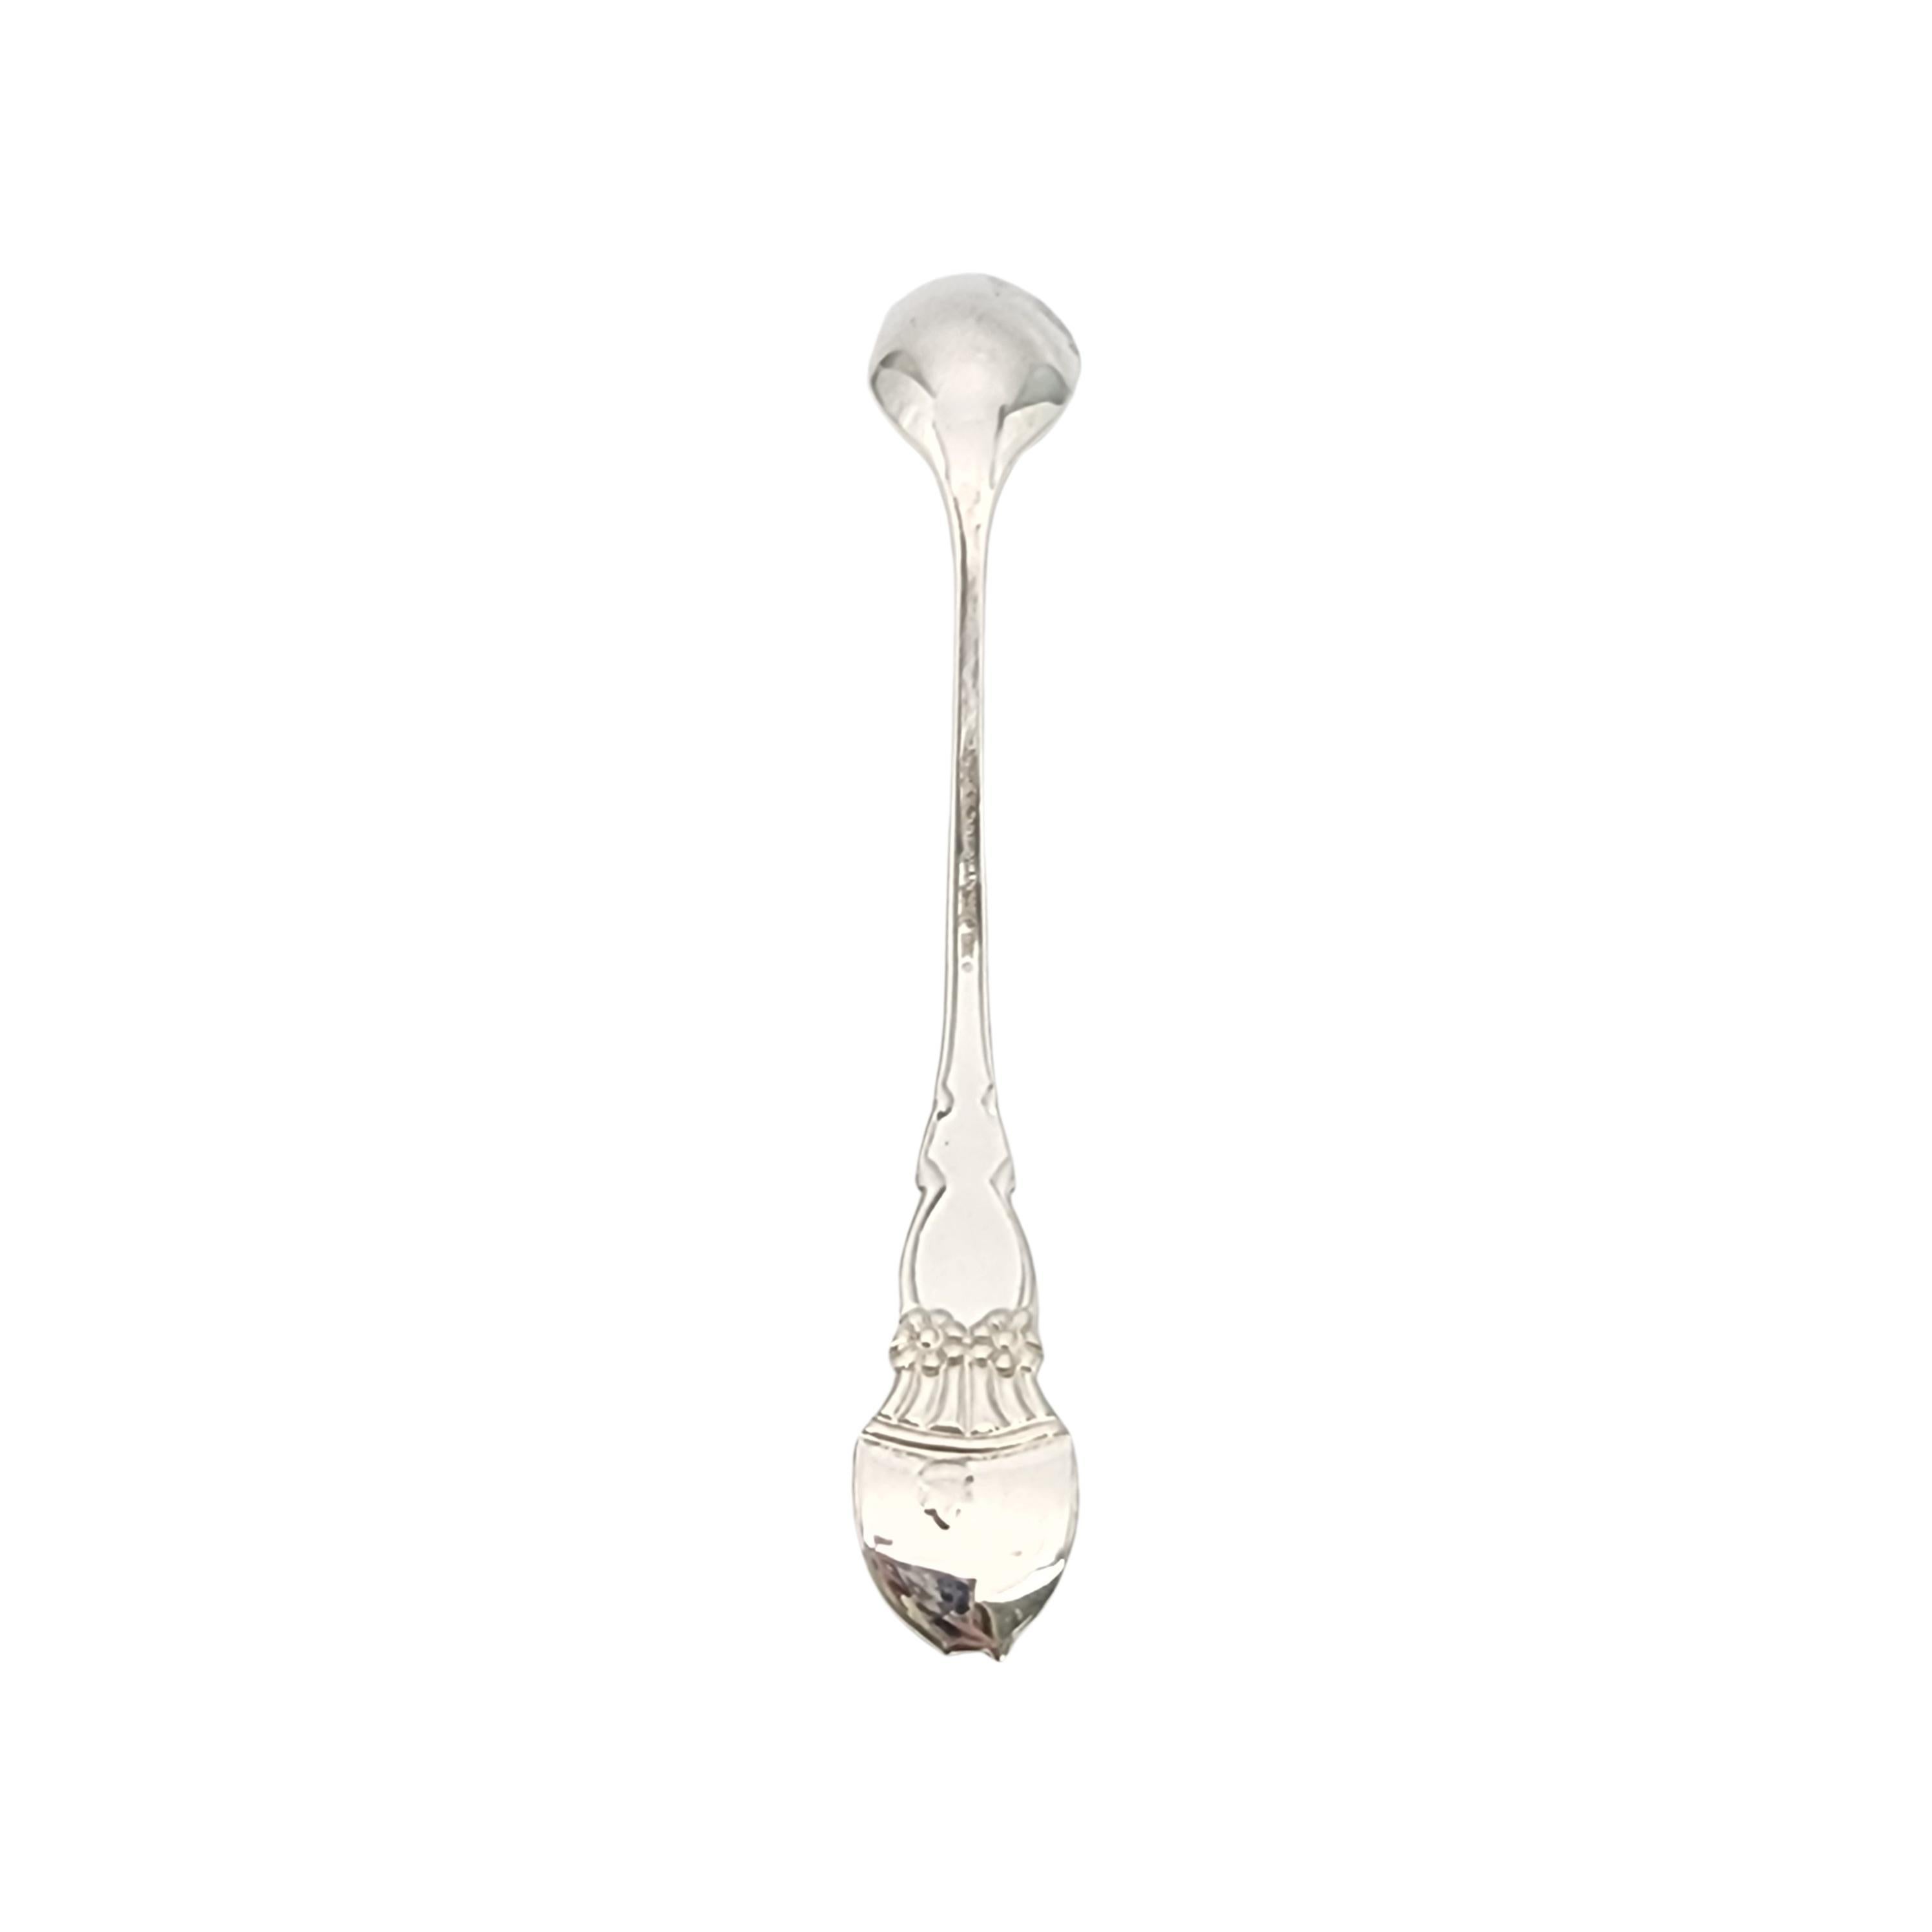 Tiffany & Co sterling silver Meadows baby feeding spoon with pouch.

Meadows is a simple and classic design featuring a a bunny rabbit and flowers with a bow on the front of the handle and a small bunny tail on top of the back of the handle. No